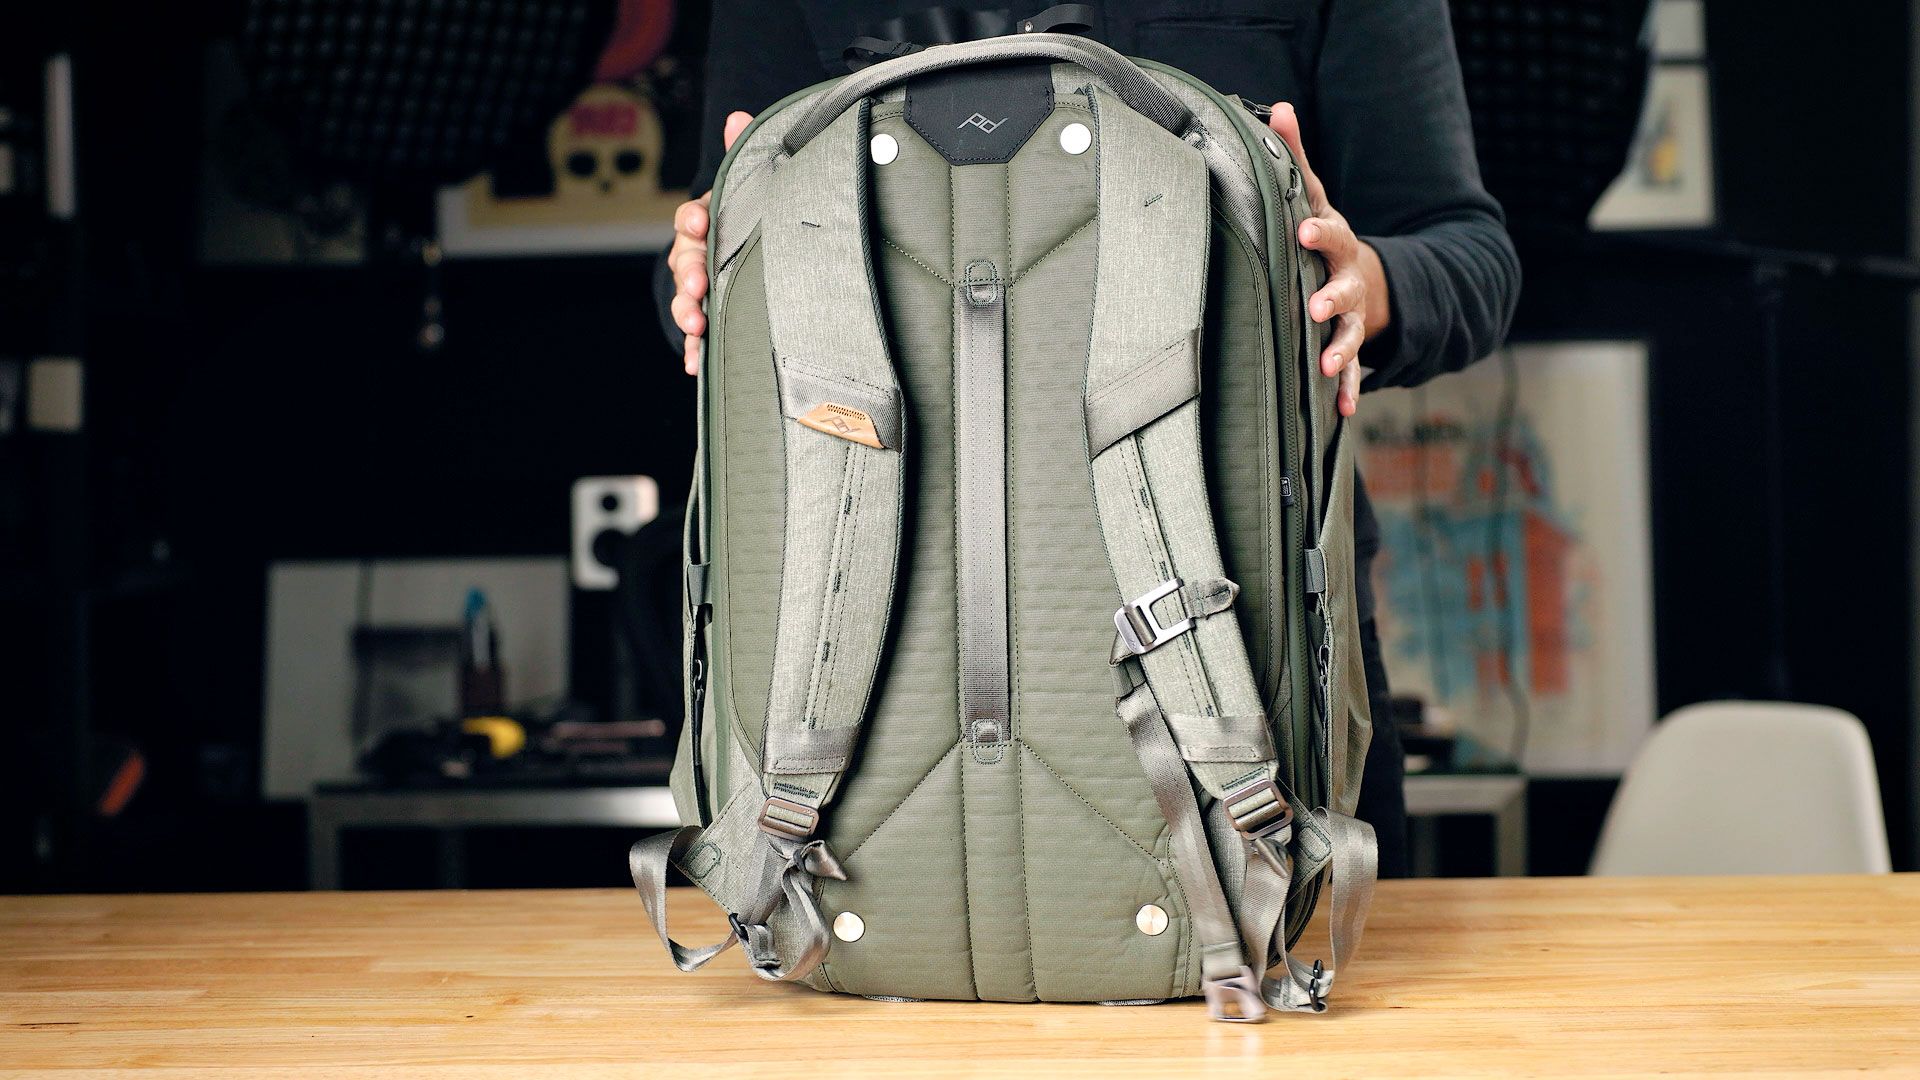 Peak Design Travel Backpack review: bag for photography and travel